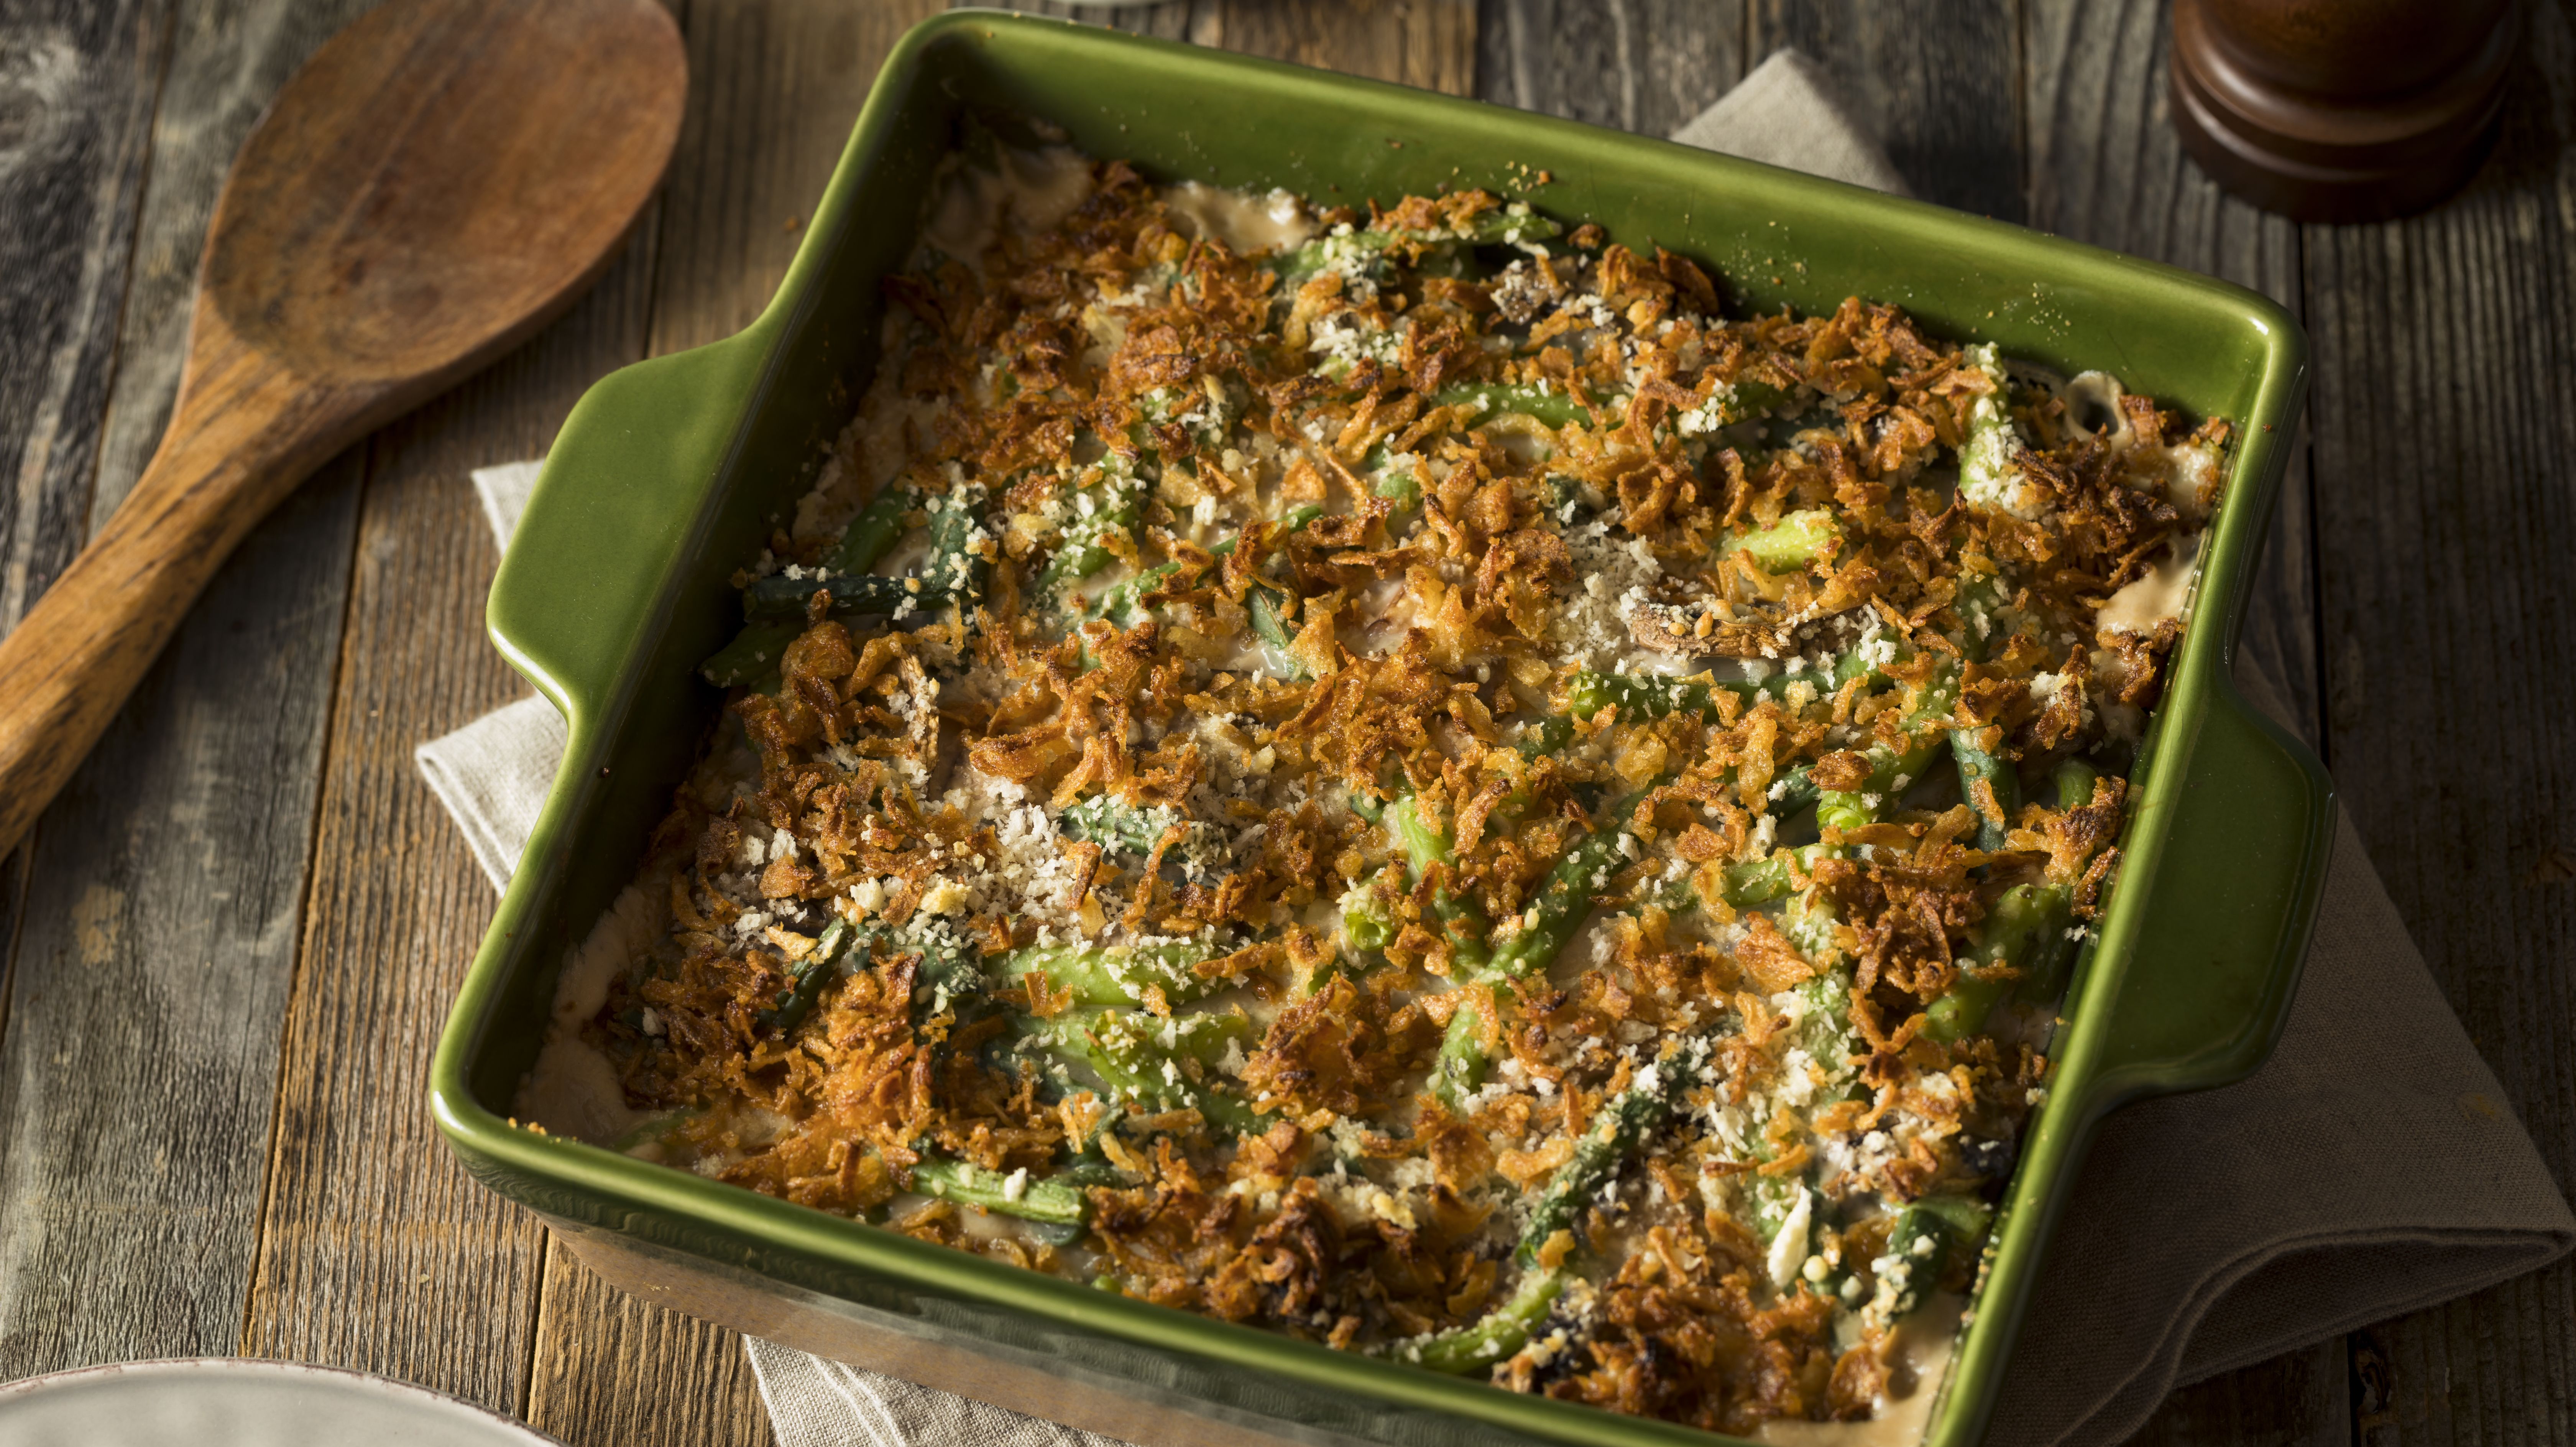 5 Simple Ways to Upgrade Your Green Bean Casserole